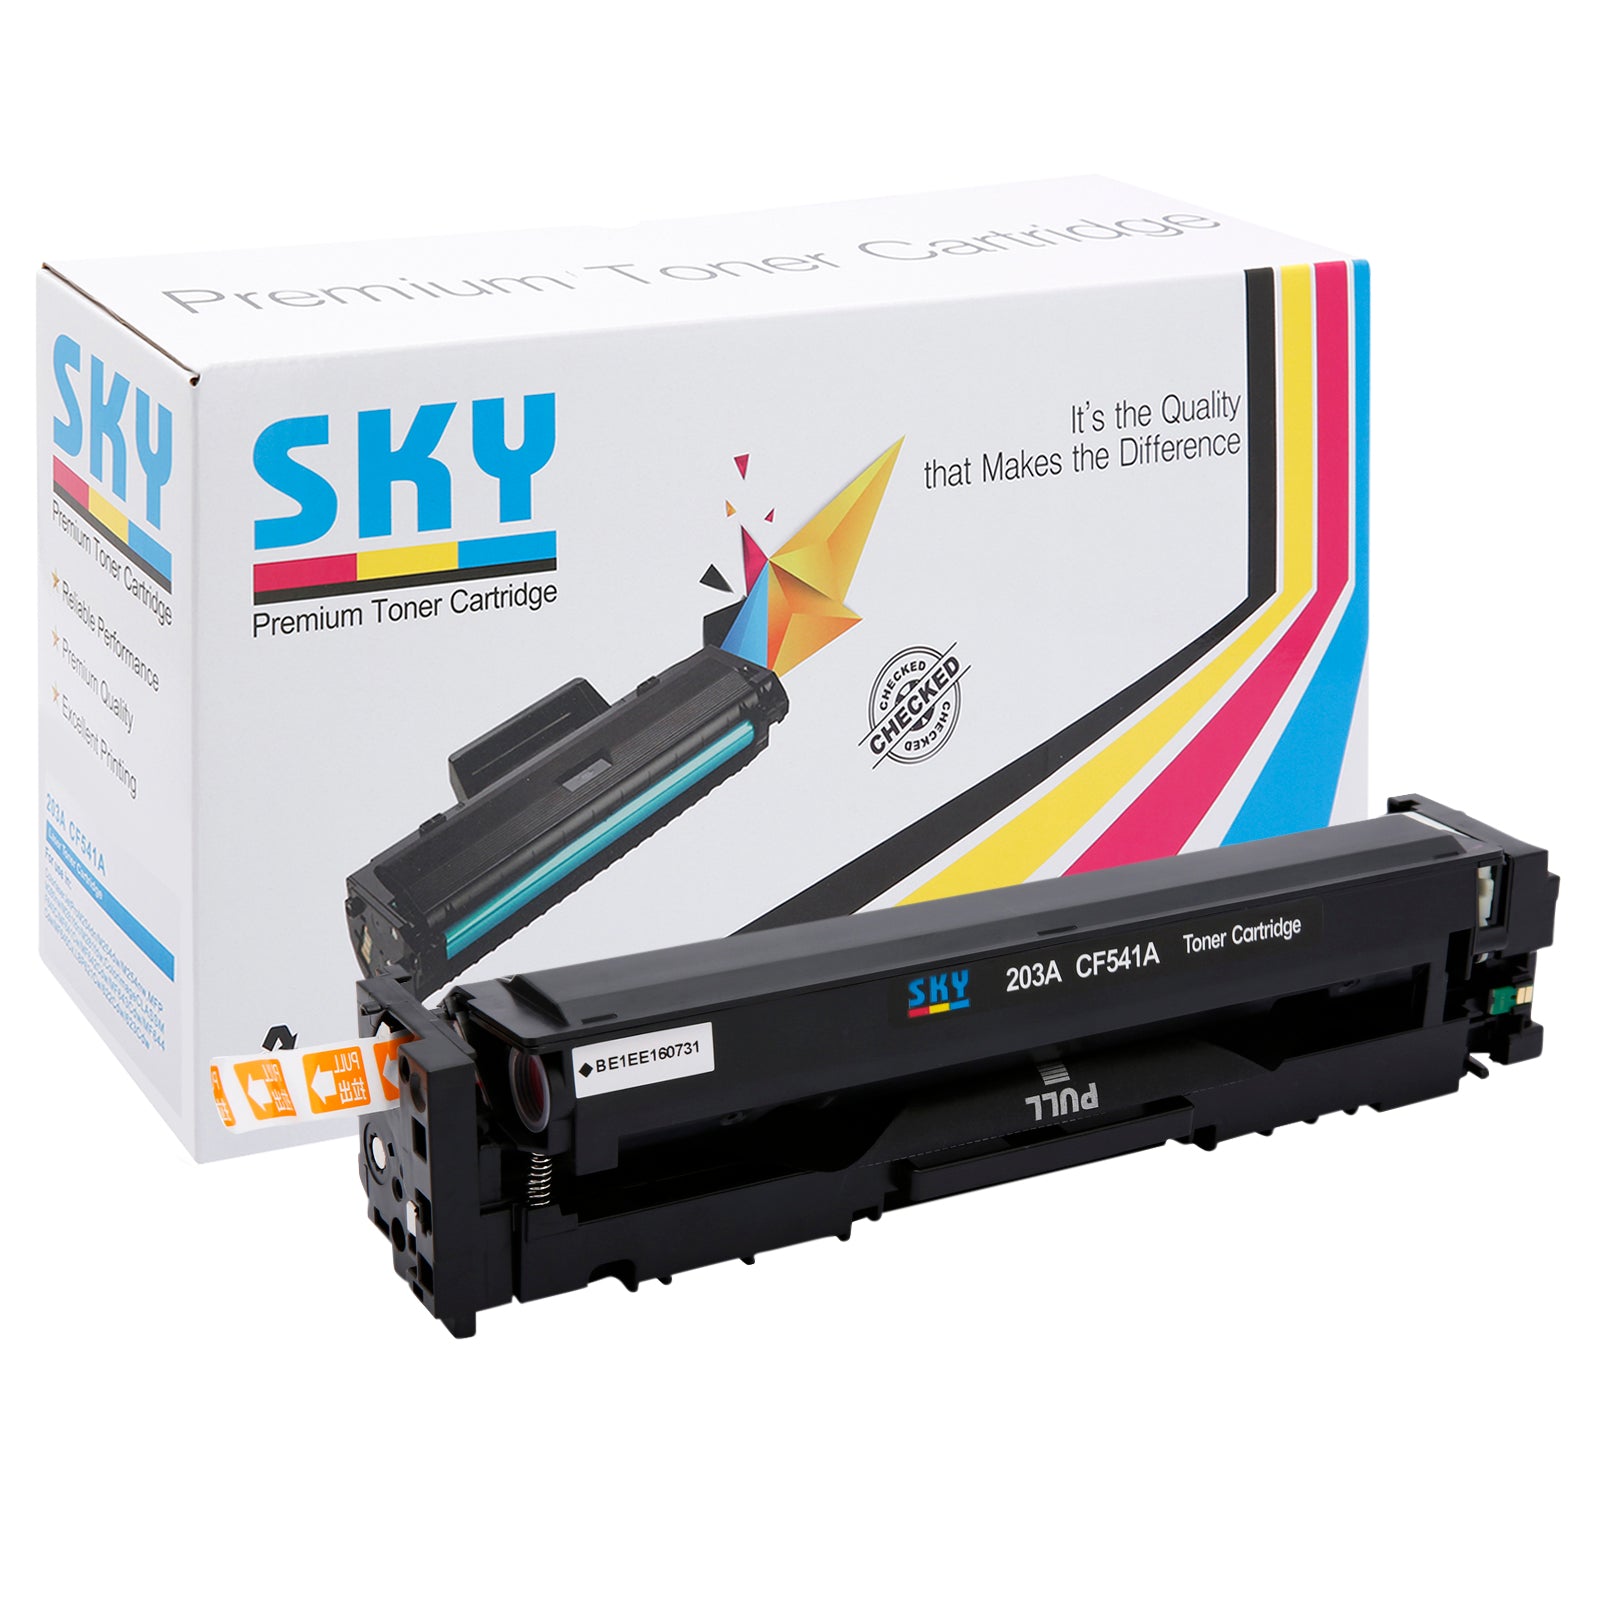 SKY  054 Compatible Toner Cartridge for Canon LBP620C and MF640c MF645cx Series